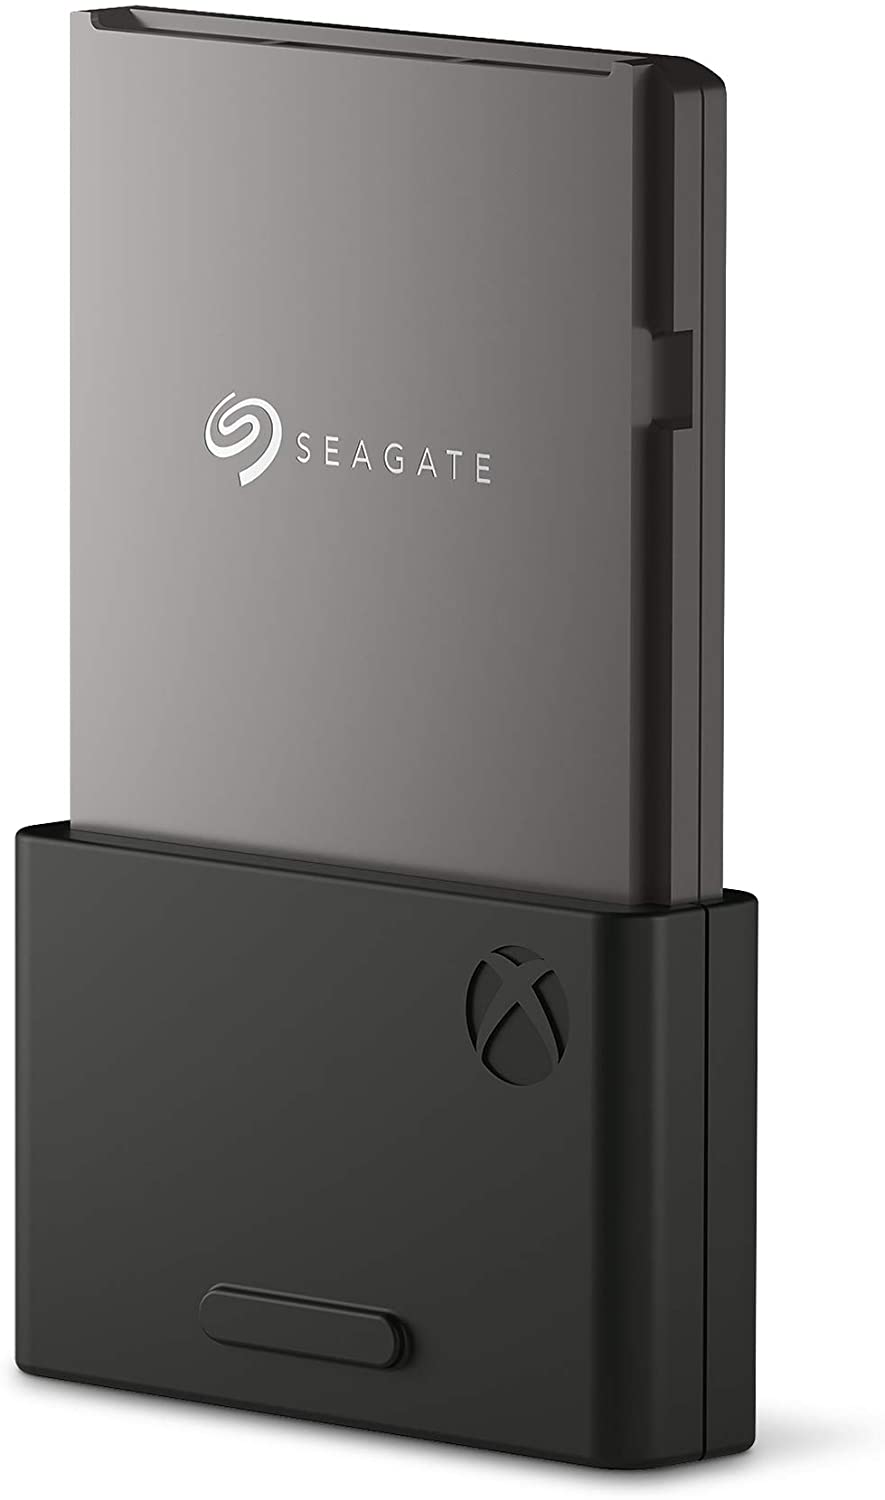 seagate hard drive for mac use on xbox one